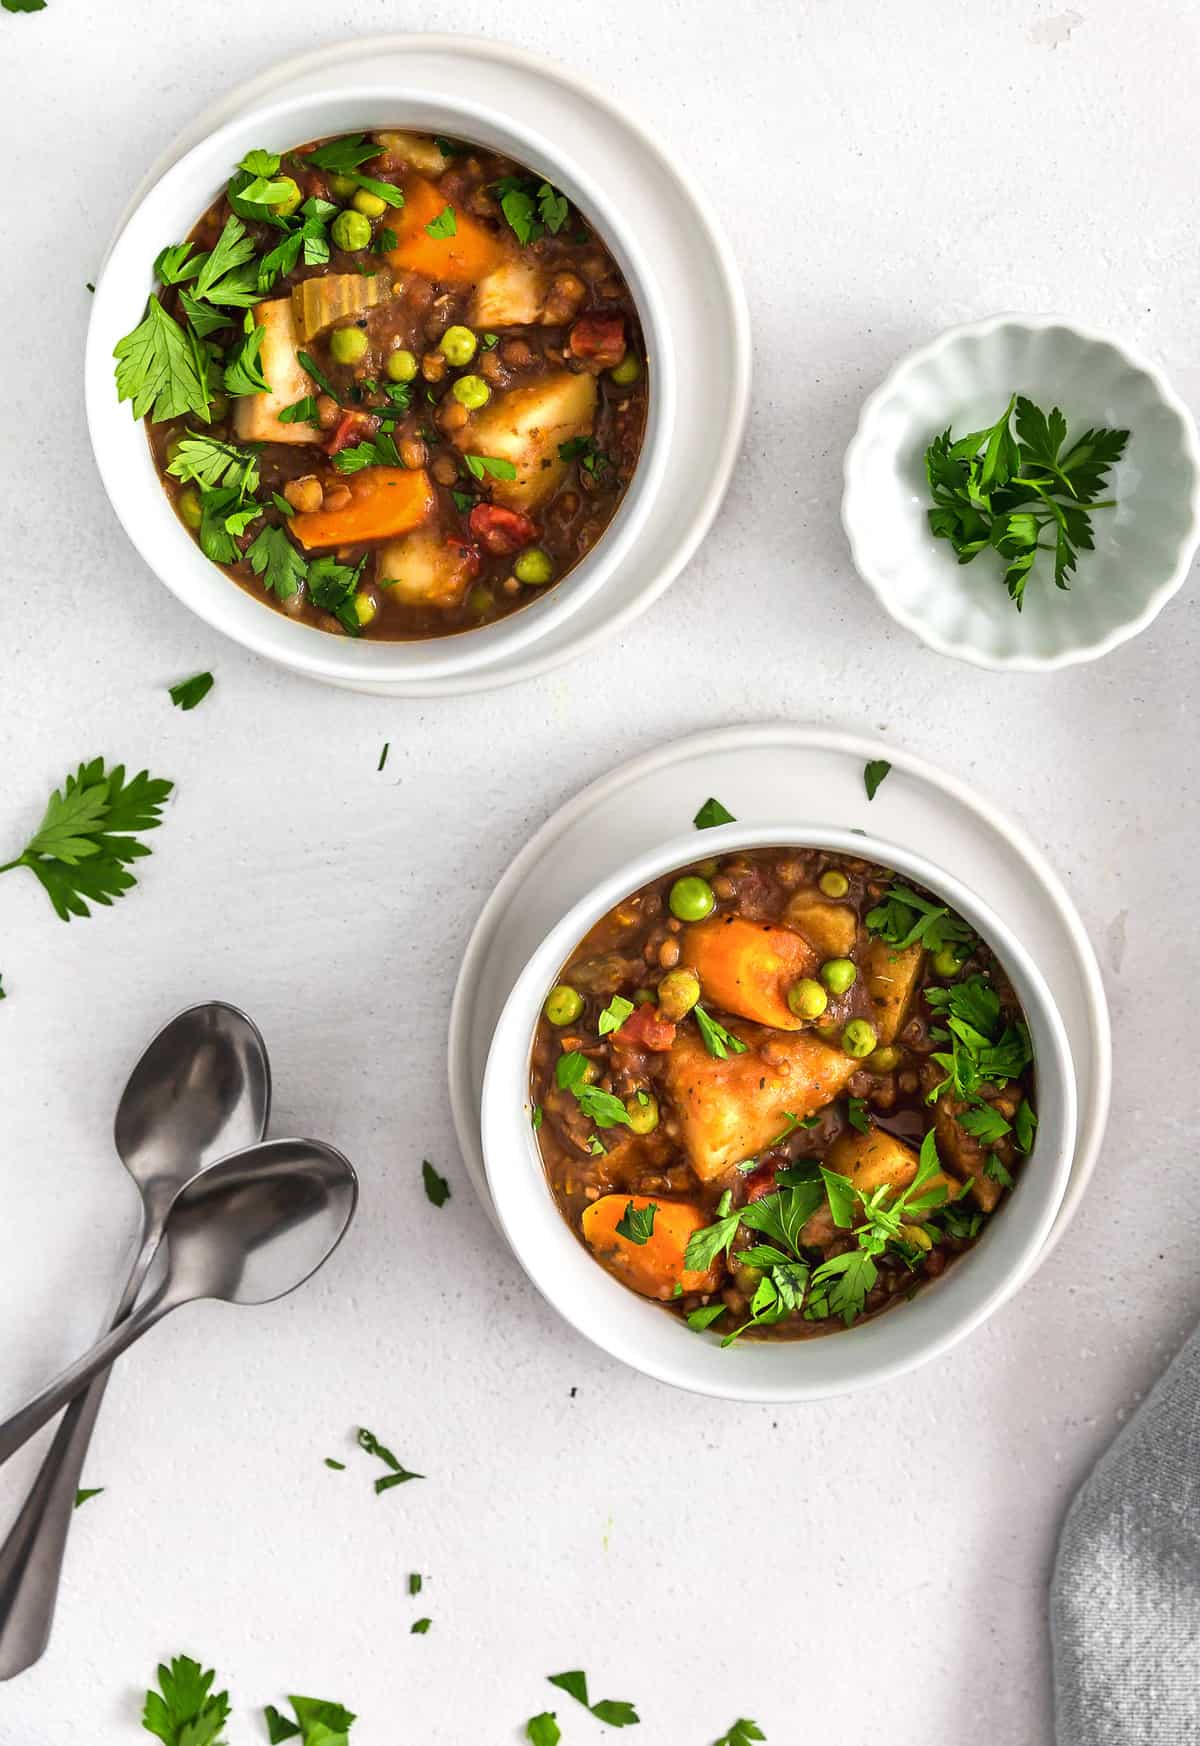 Instant Pot Beef Stew, plant based, vegan, vegetarian, whole food plant based, gluten free, recipe, wfpb, healthy, healthy vegan, oil free, no refined sugar, no oil, refined sugar free, dairy free, lentils, stew, dinner, Instant Pot